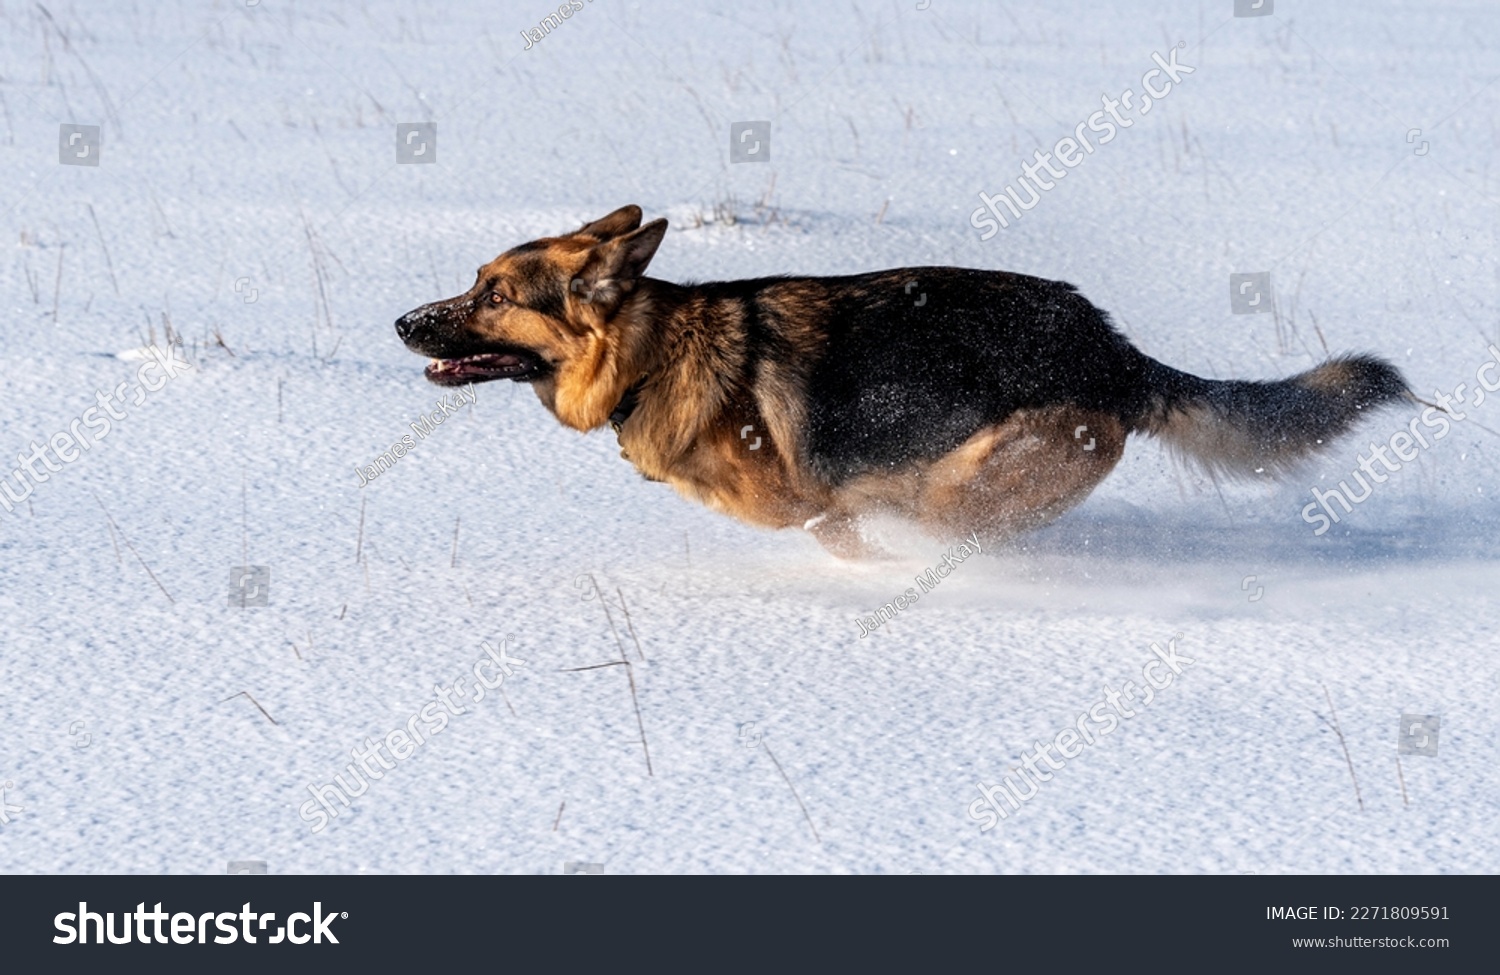 A German Shepherd dog running playing in the snow. #2271809591